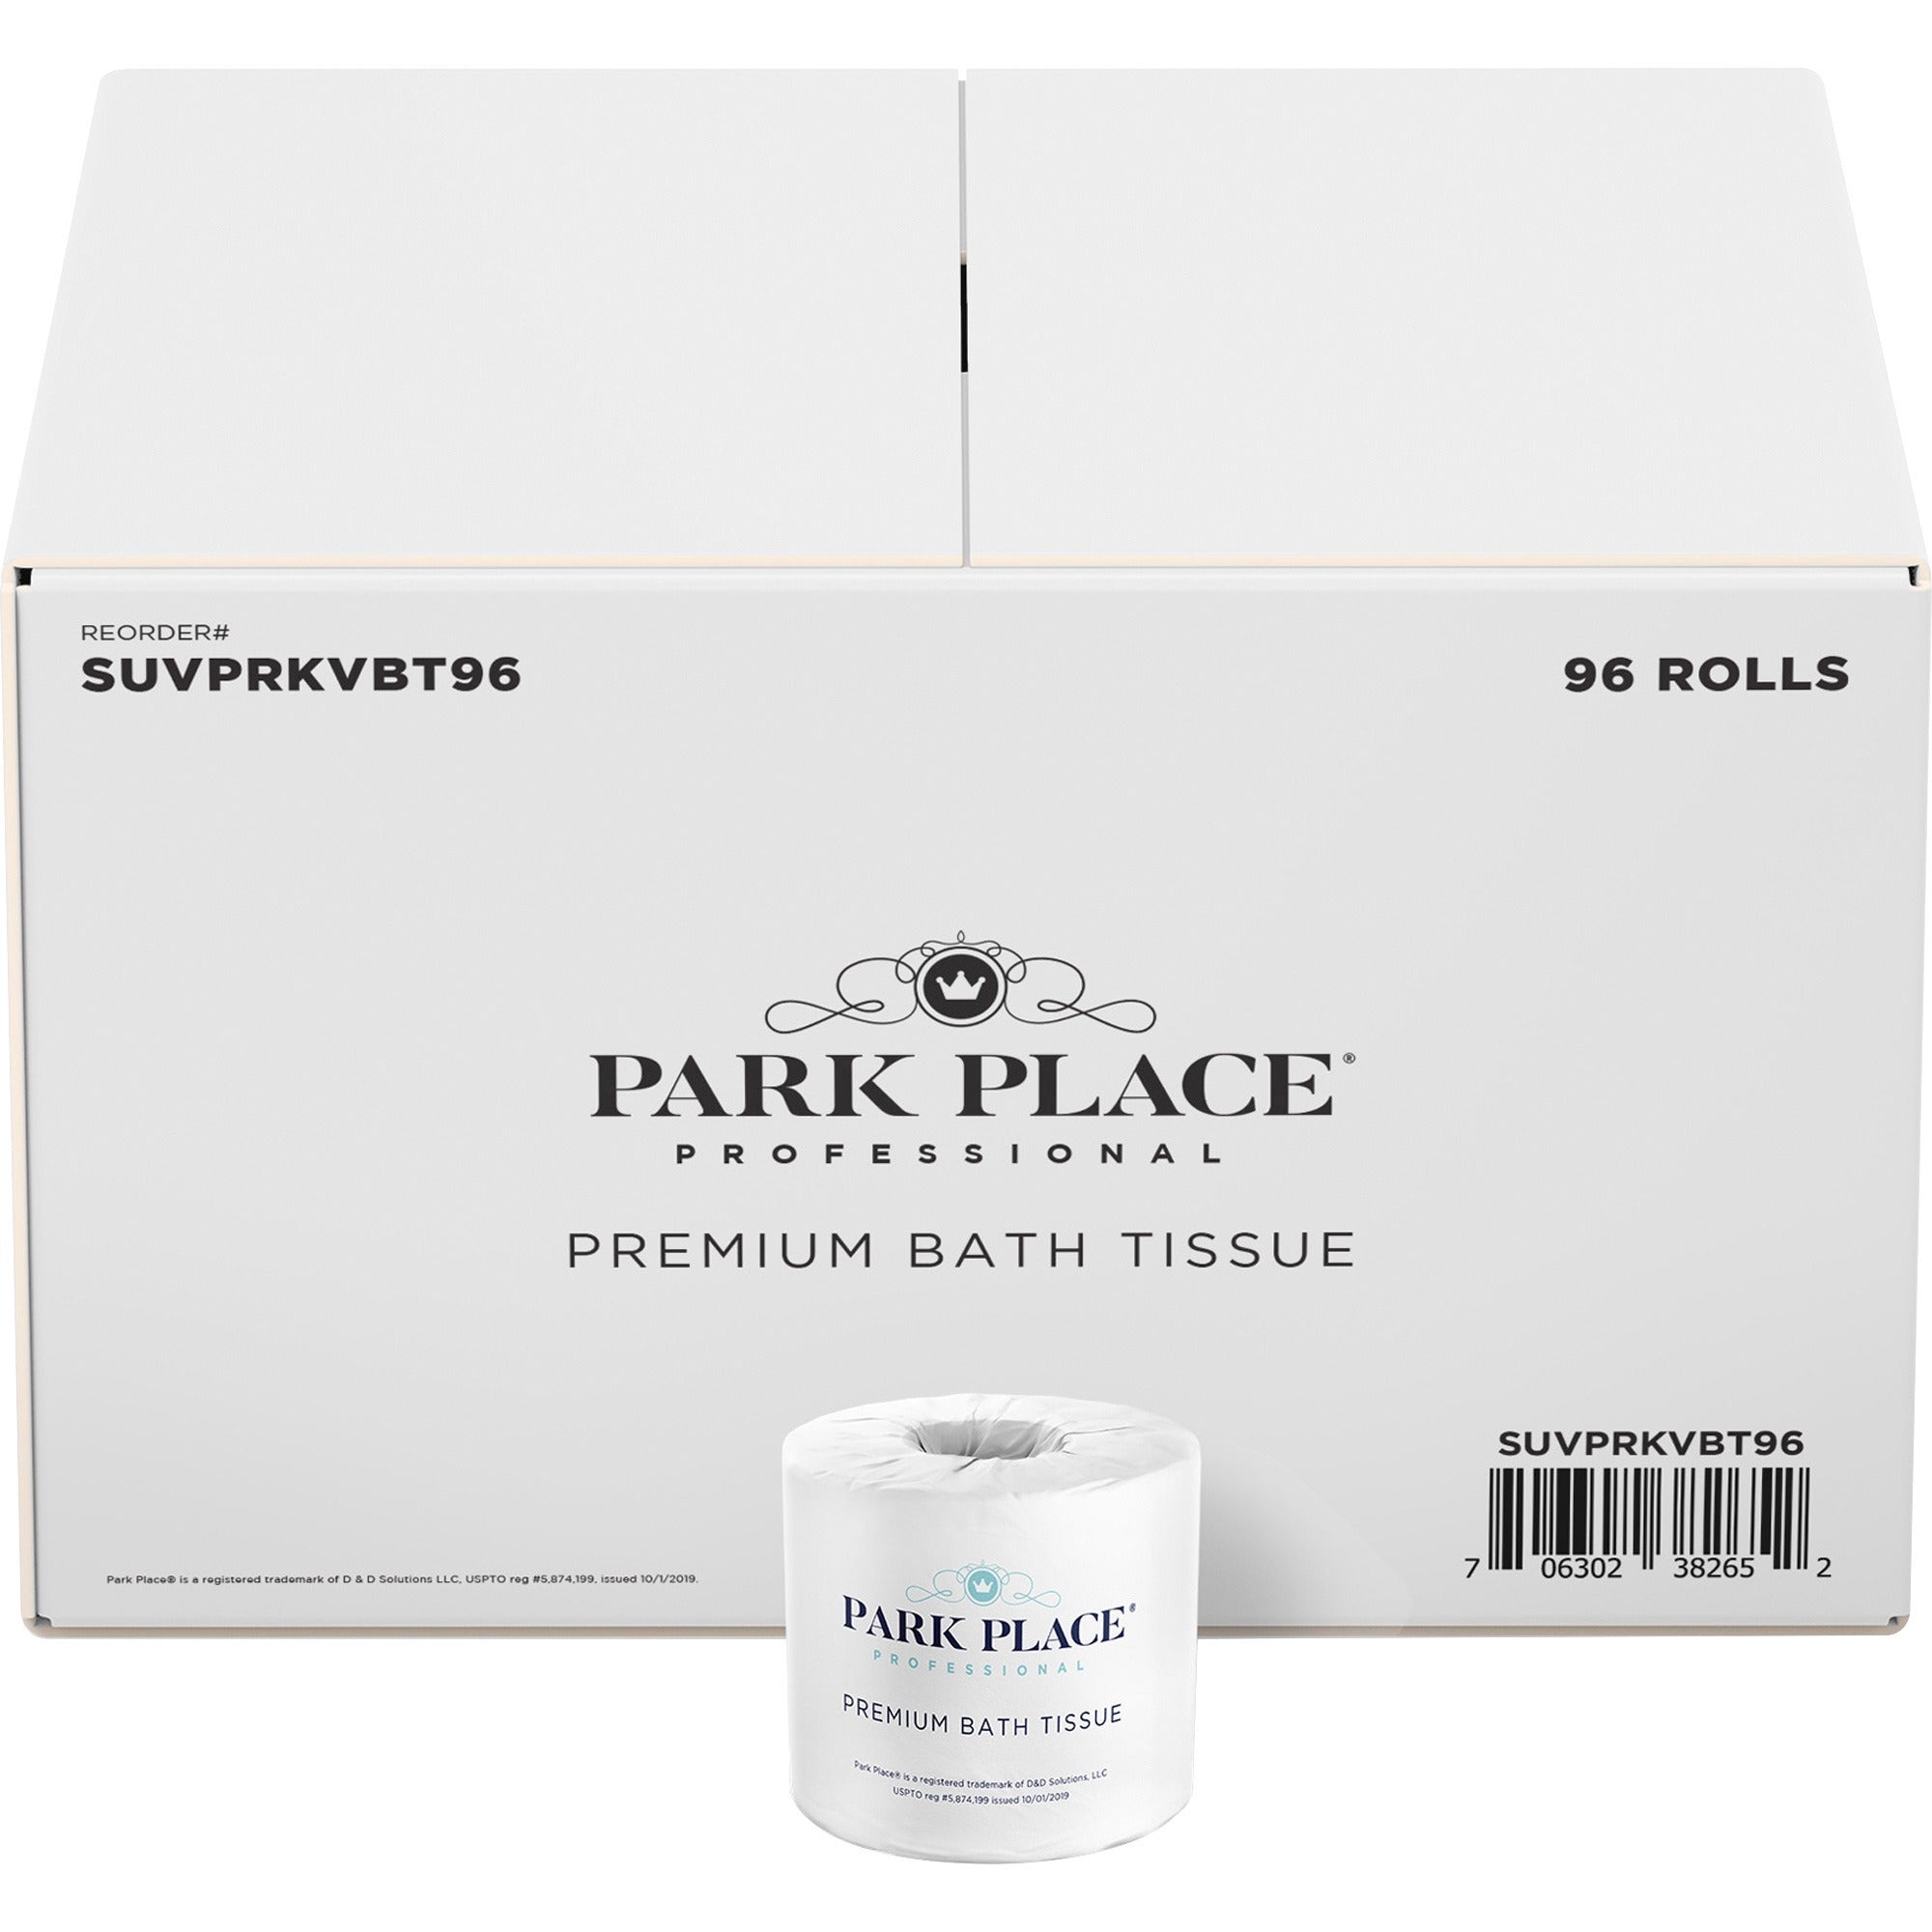 park-place-double-ply-premium-bath-tissue-rolls-2-ply-420-sheets-roll-white-for-bathroom-96-carton_suvprkvbt96 - 1